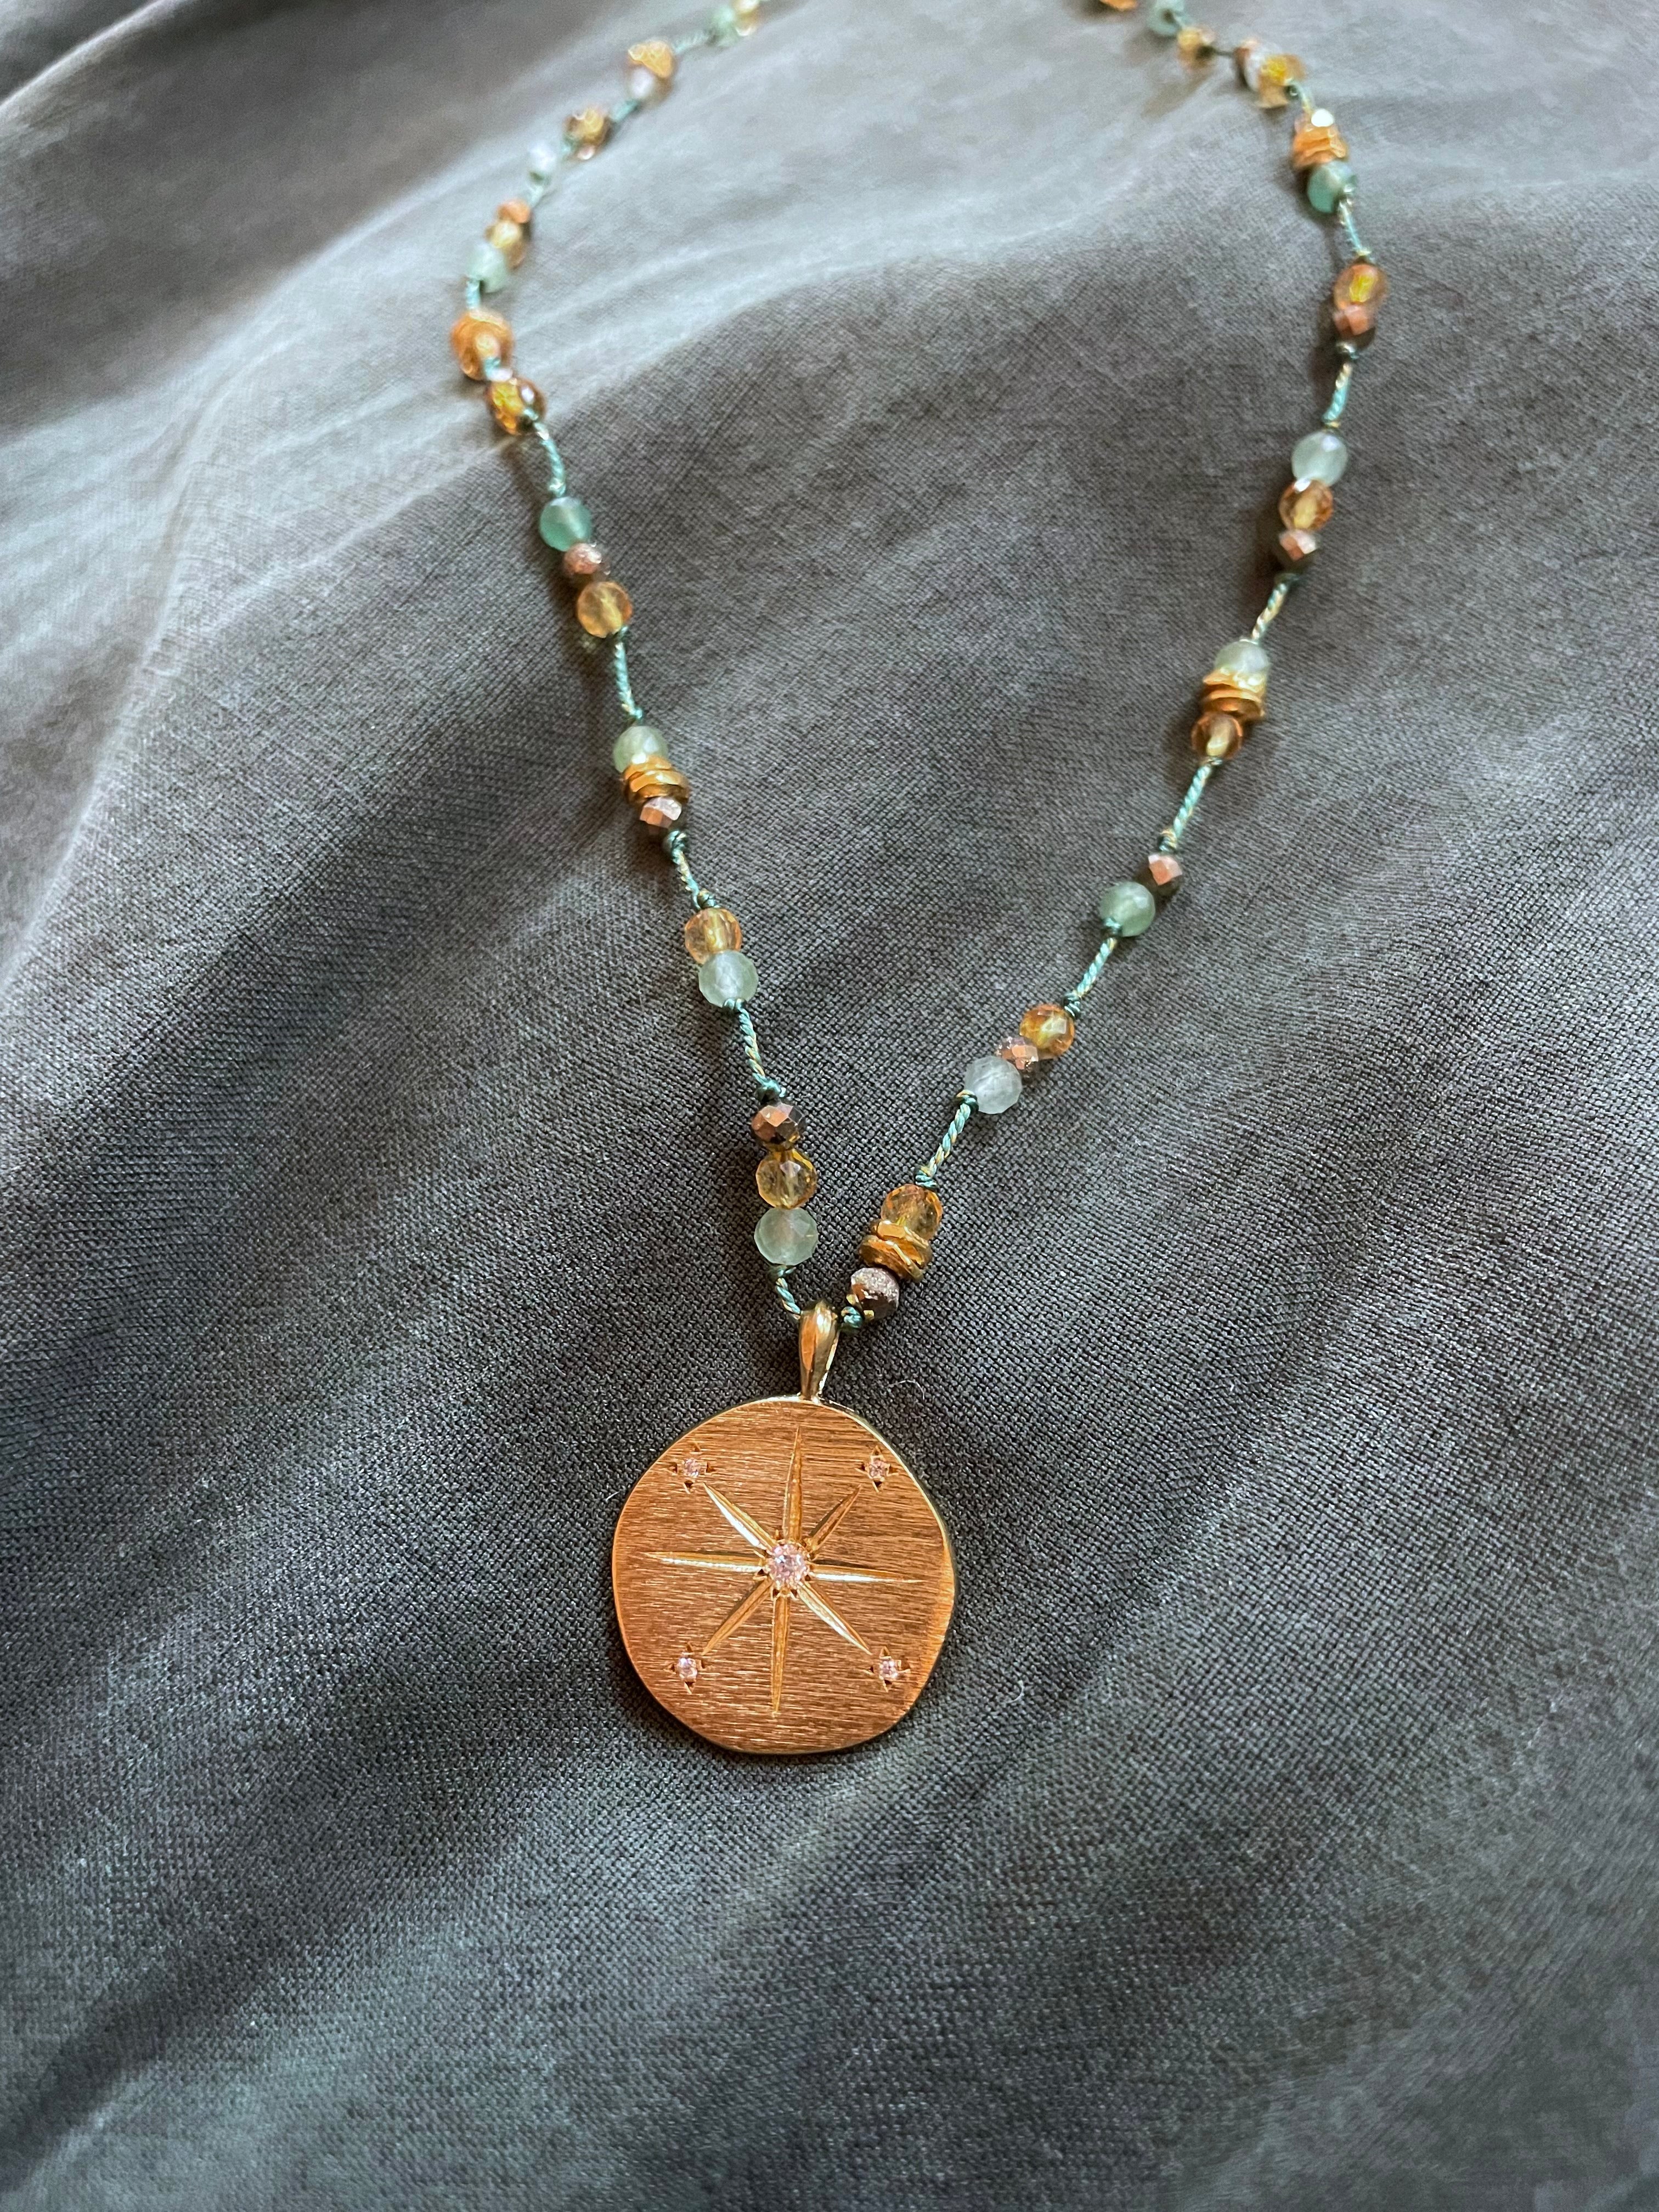 emerald thread necklace with sun medallion gold pendant by hanka in